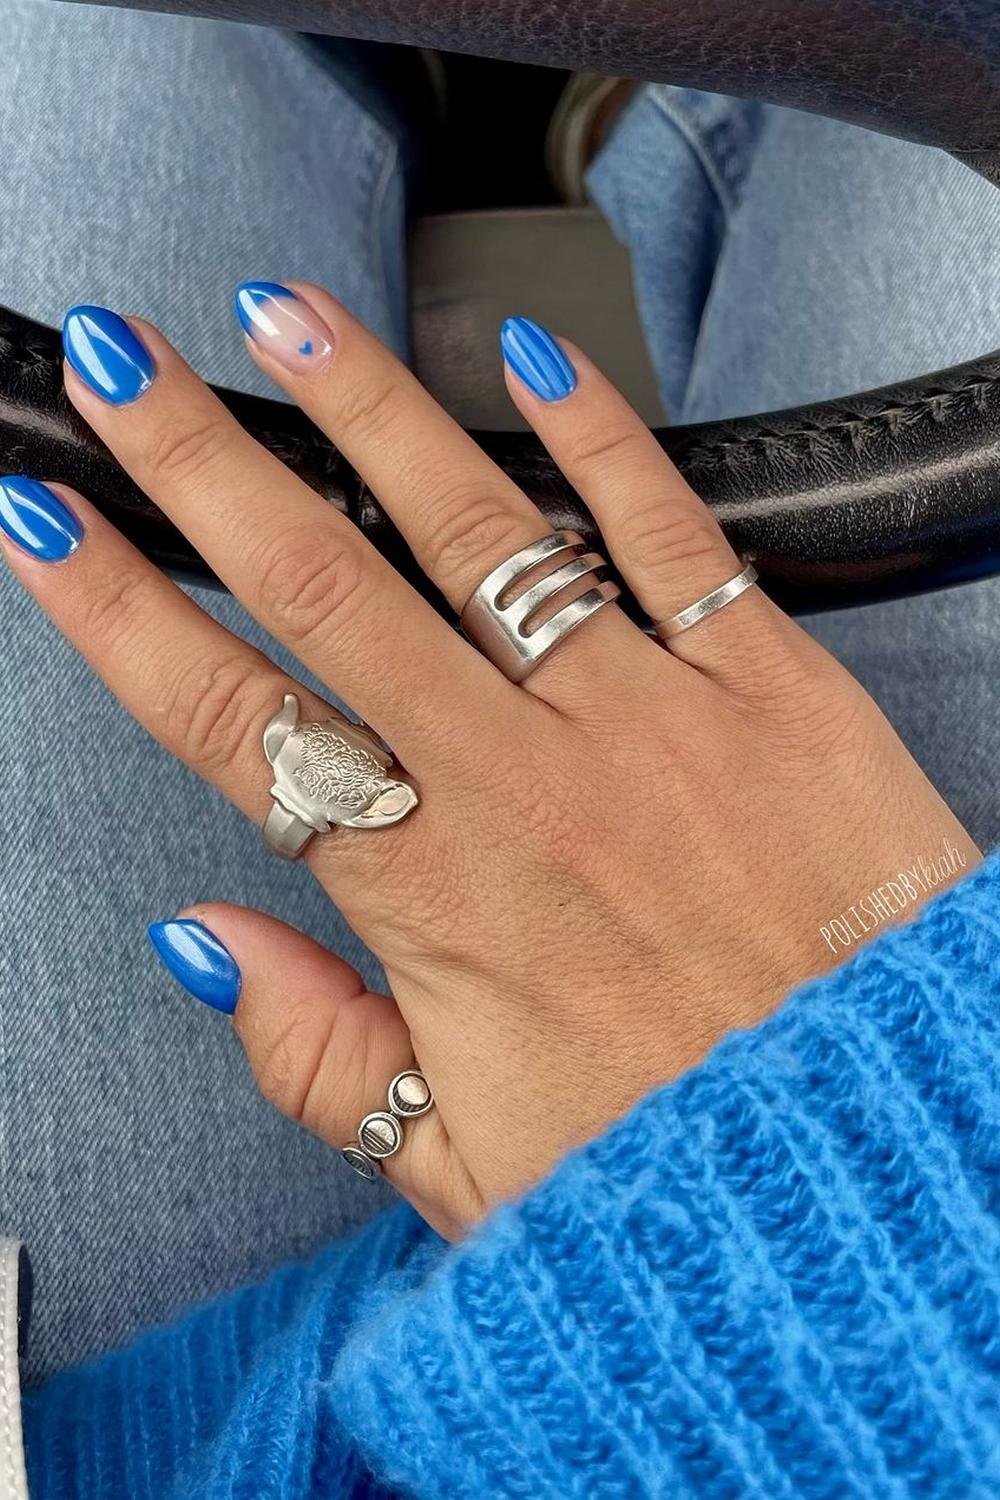 27 - Picture of Blue Chrome Nails